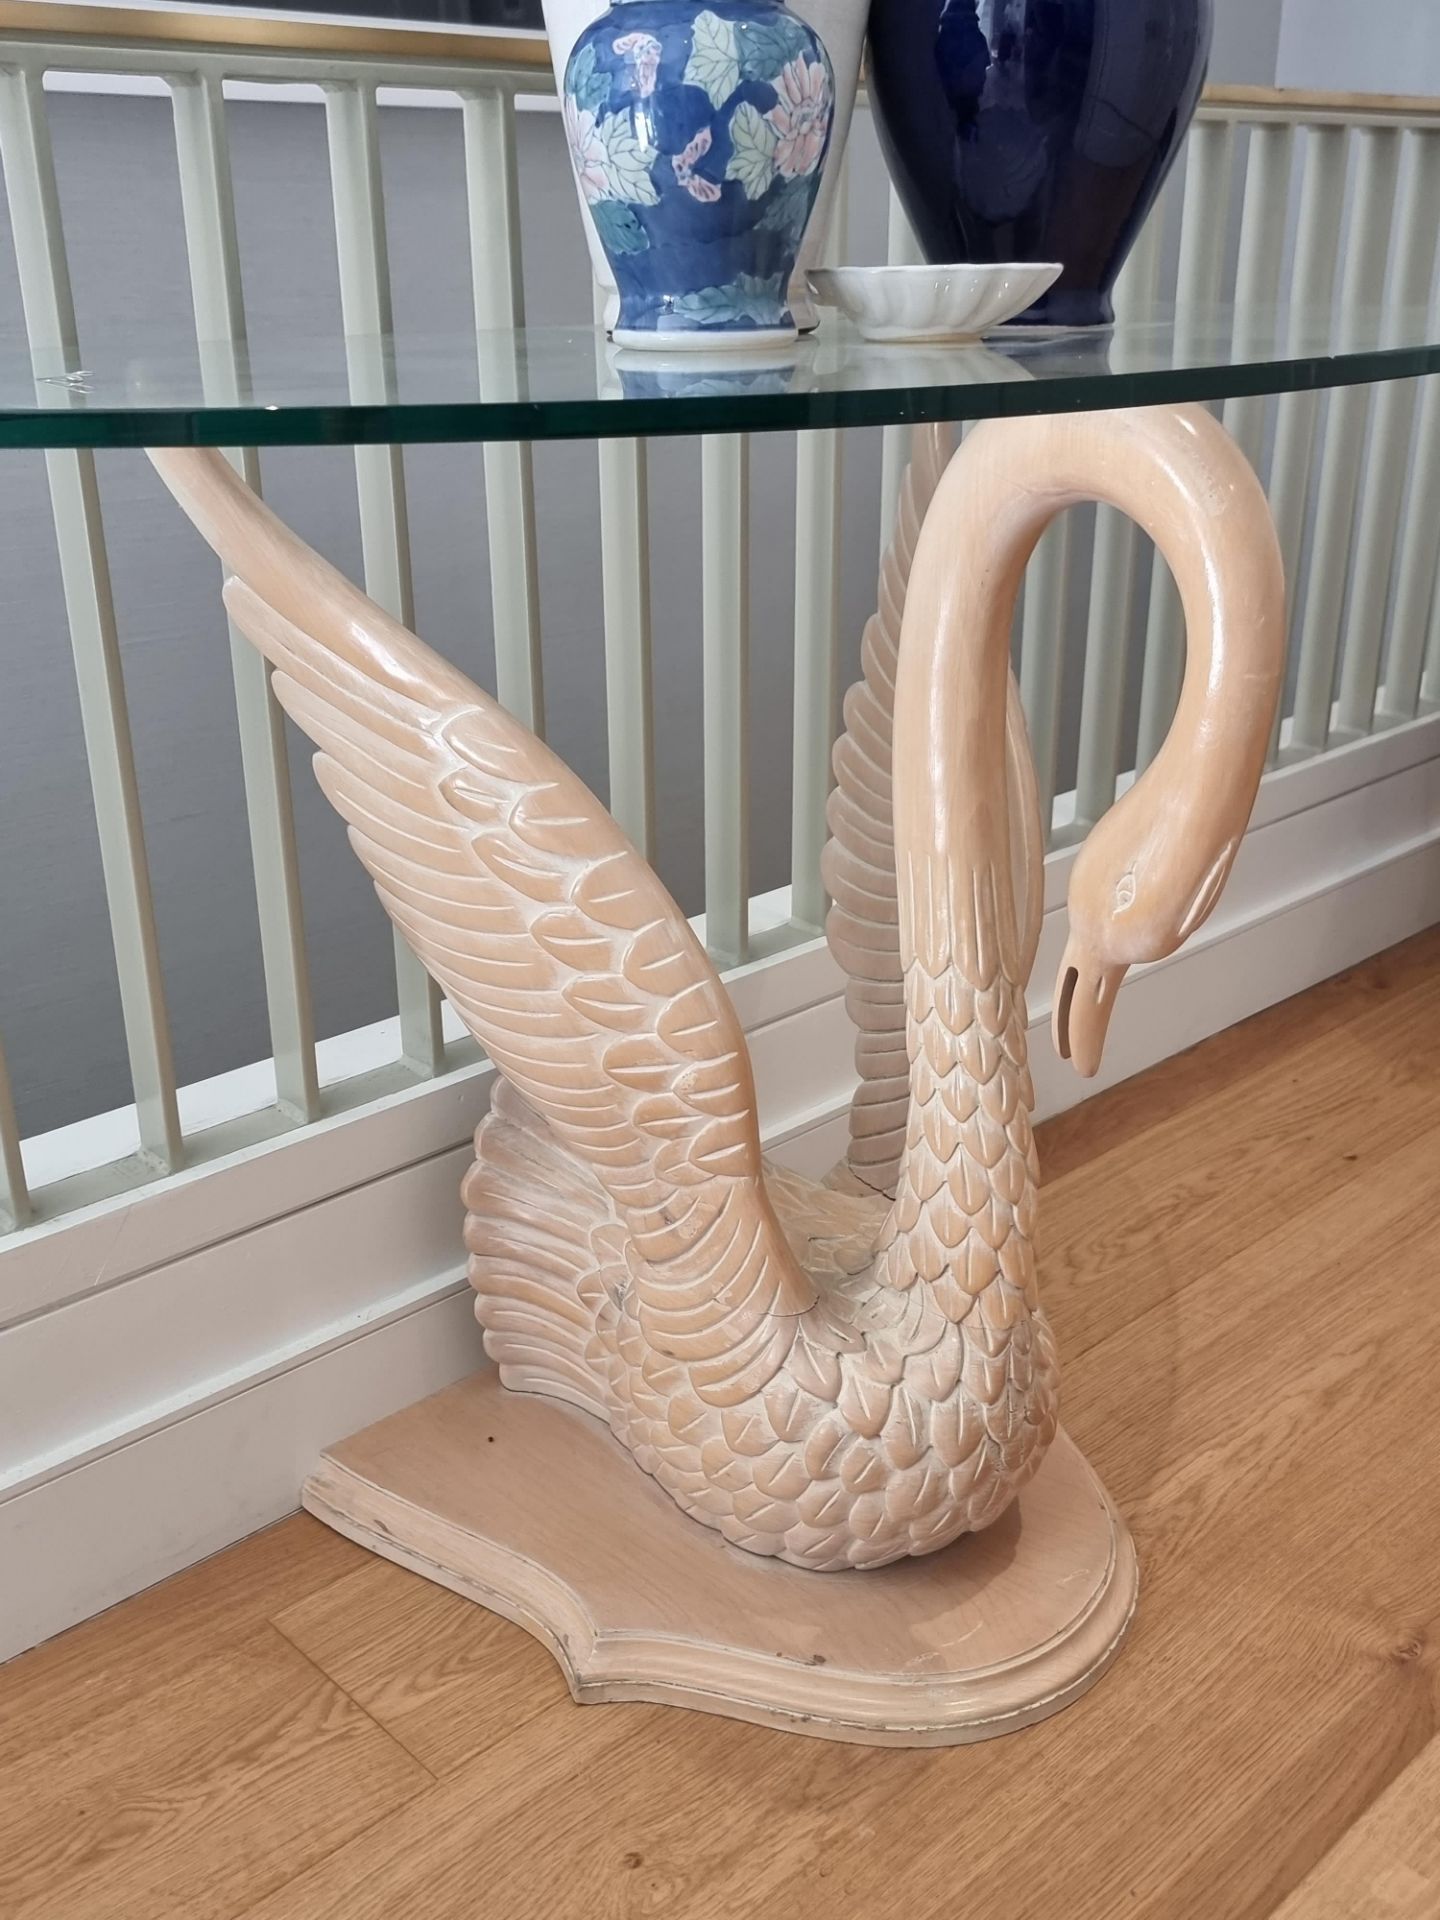 Swan Table Crafted In A Decadent Hollywood Regency Styling An intricately carved swan sculpture - Bild 2 aus 3